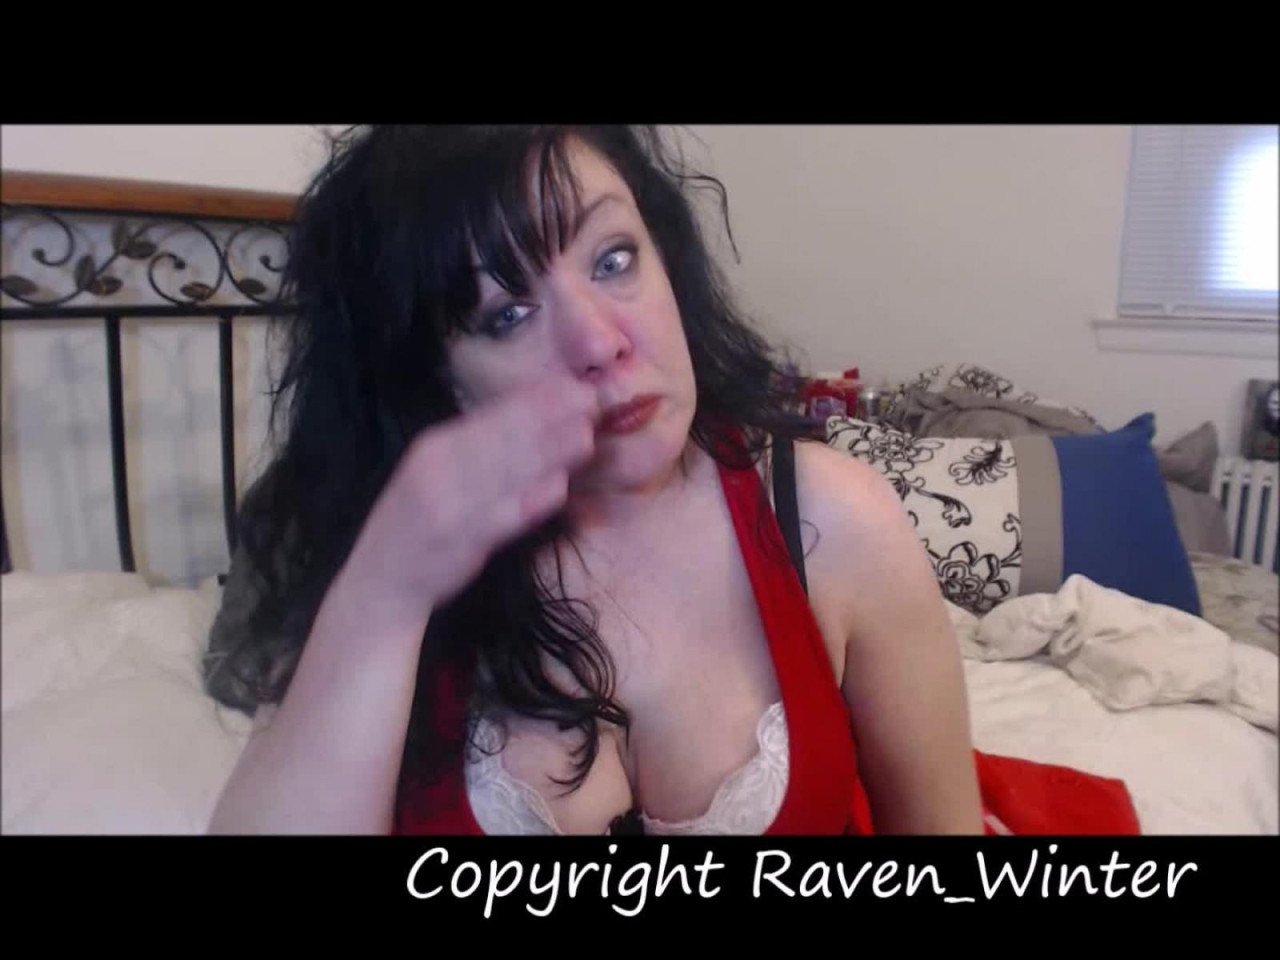 raven_winter download from 2021/12/18 15:53:33